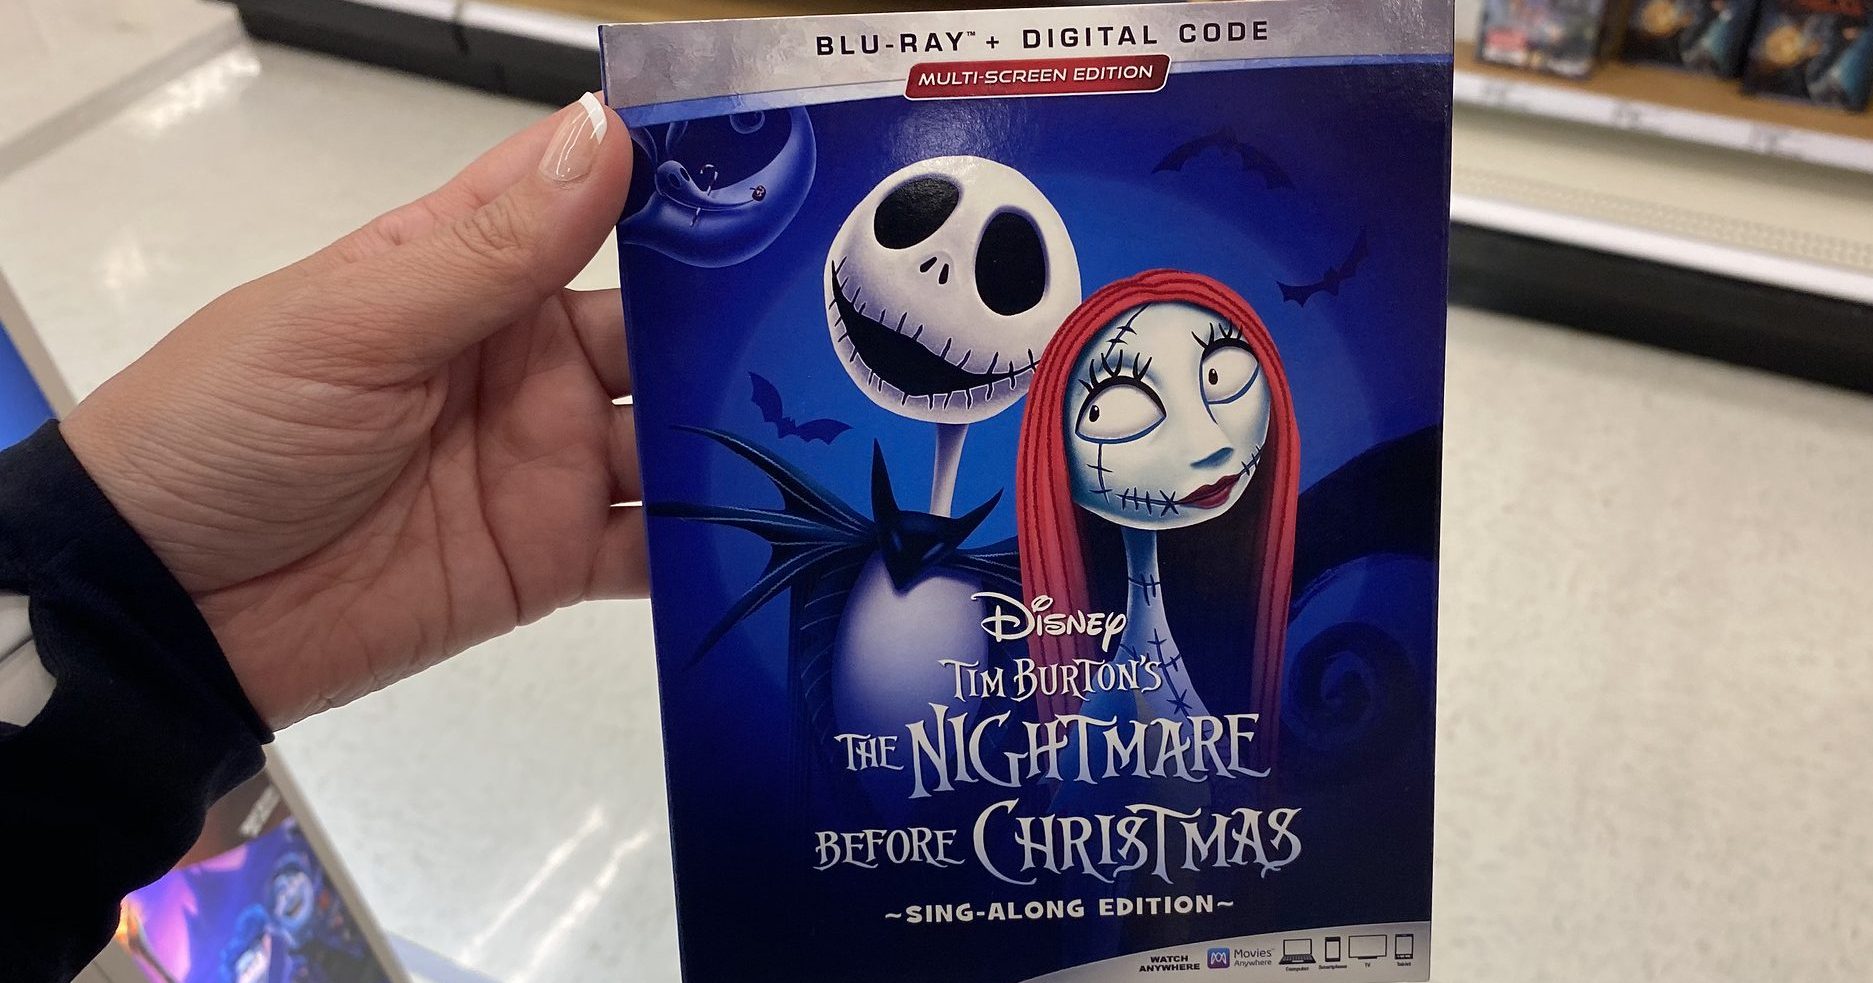 https://hip2save.com/wp-content/uploads/2020/12/nightmare-before-christmas-blu-ray-e1632706427584.jpg?resize=1873%2C983&strip=all